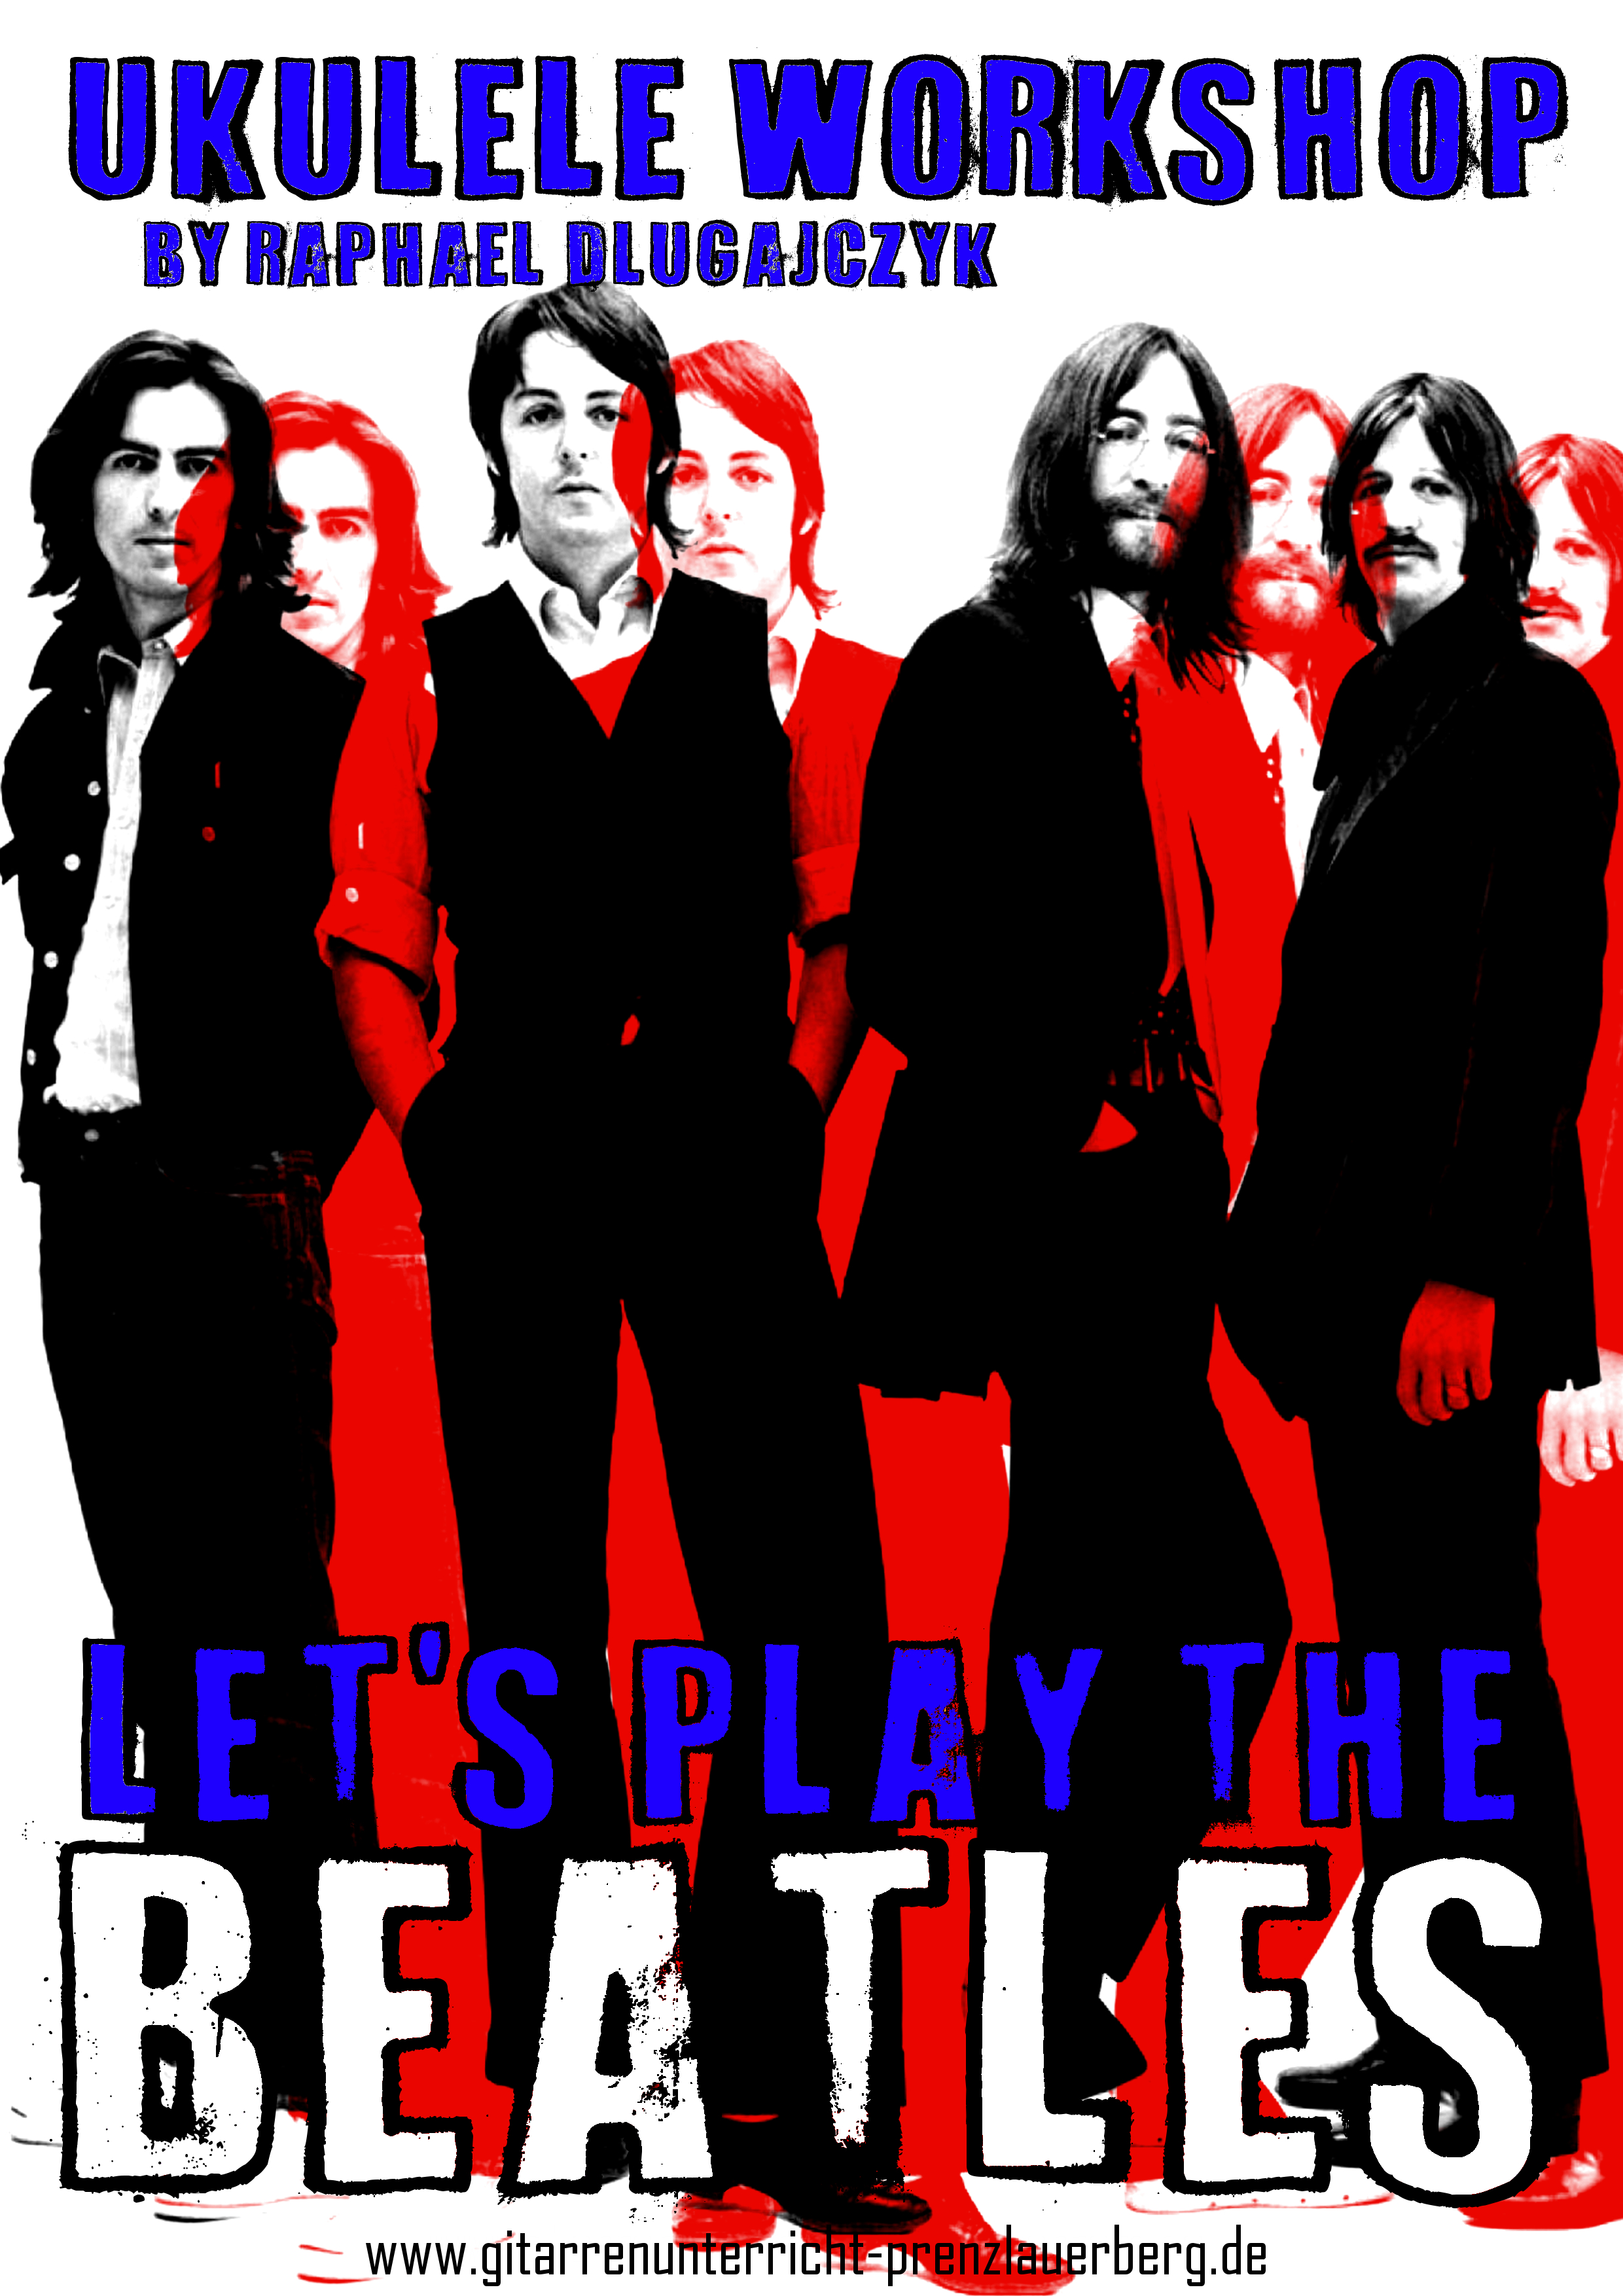 Lets's play Beatles